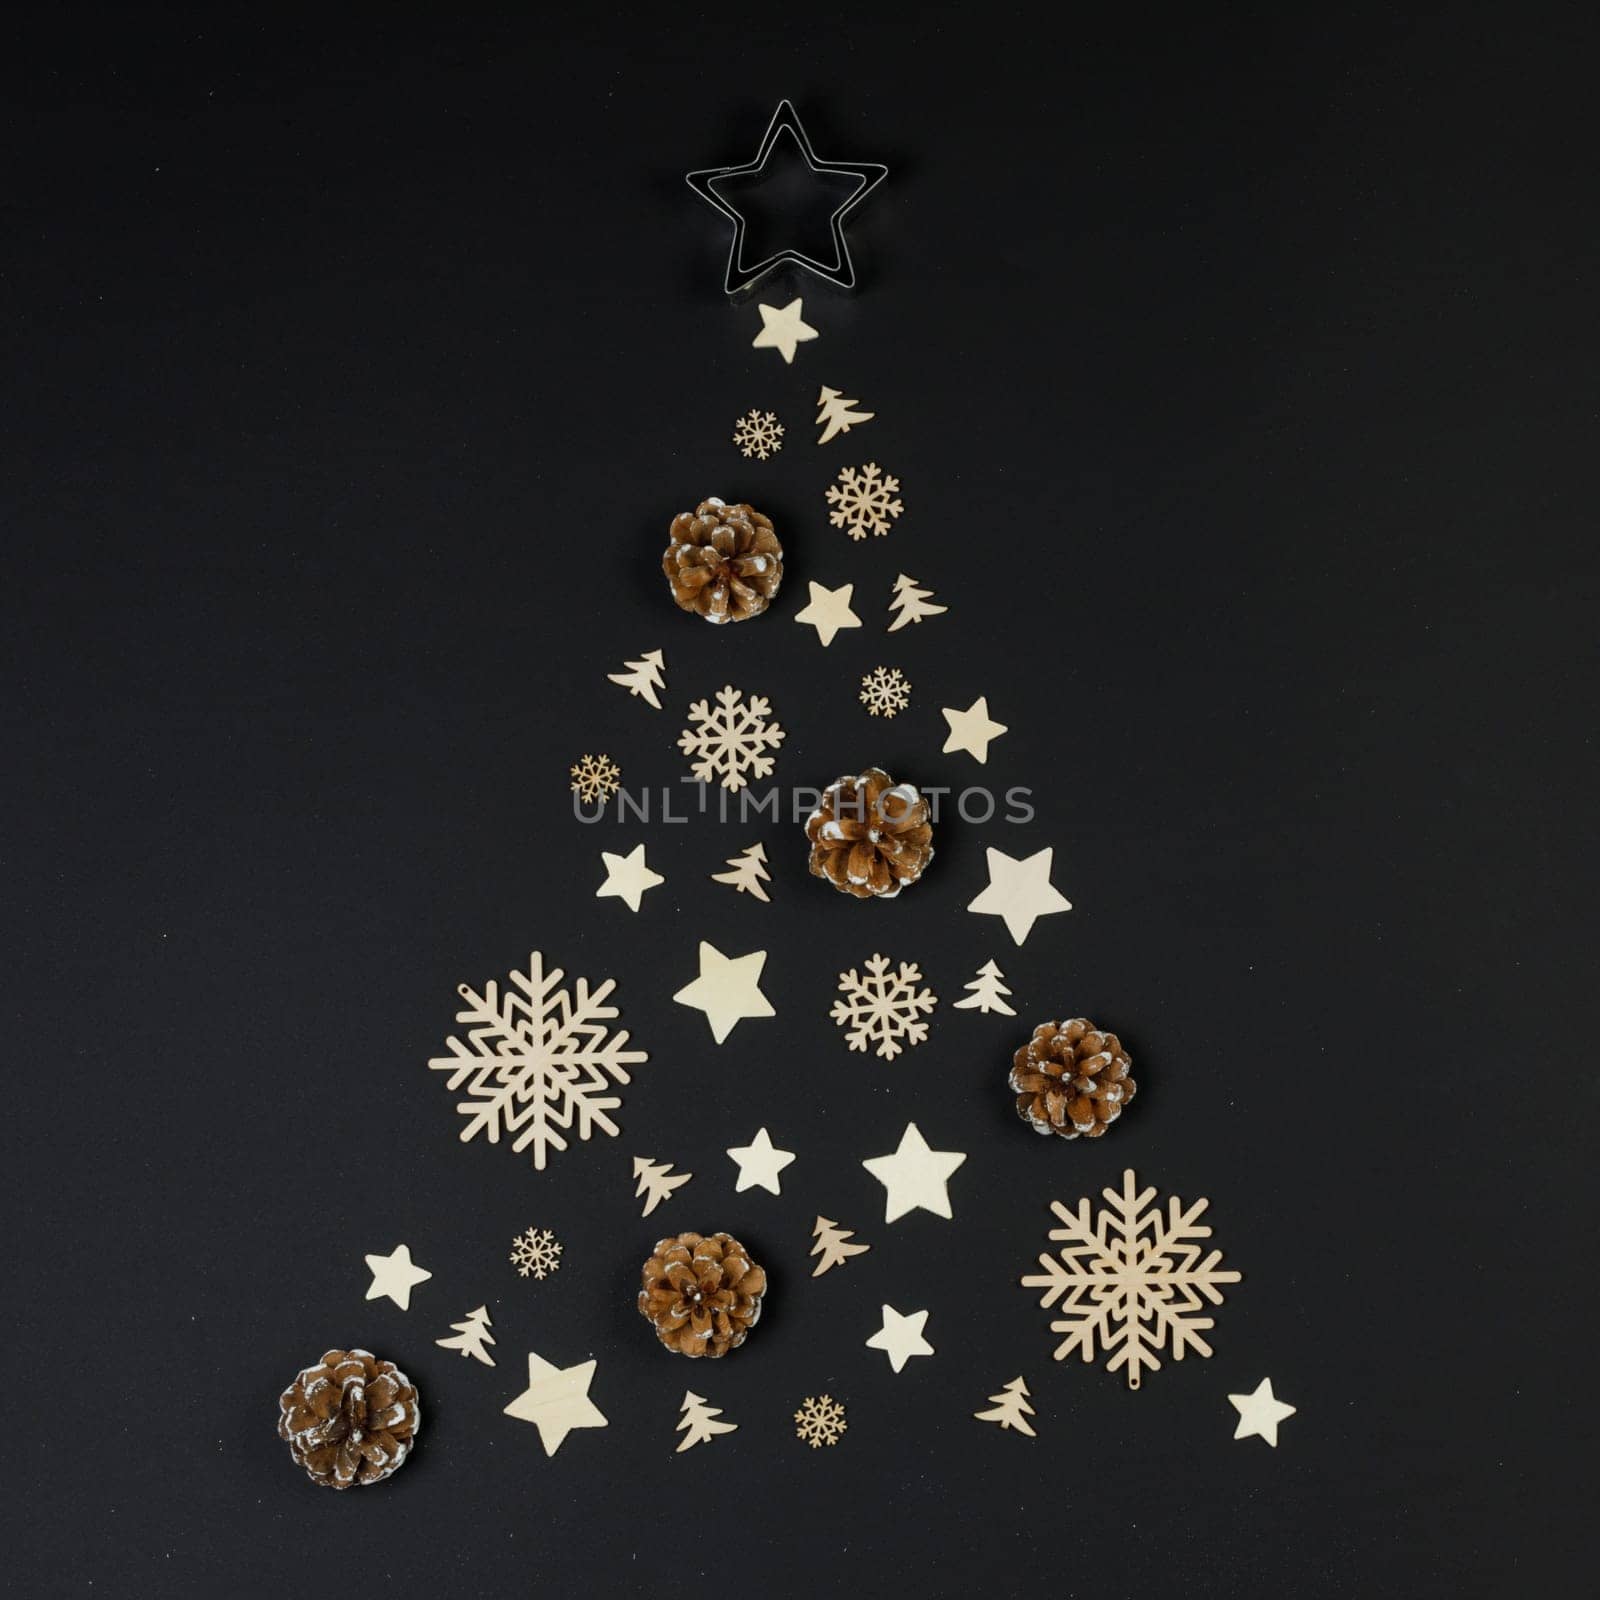 Christmas Tree made of wooden decor and pine cones on black paper background. Christmas Holiday Concept. Flat Lay